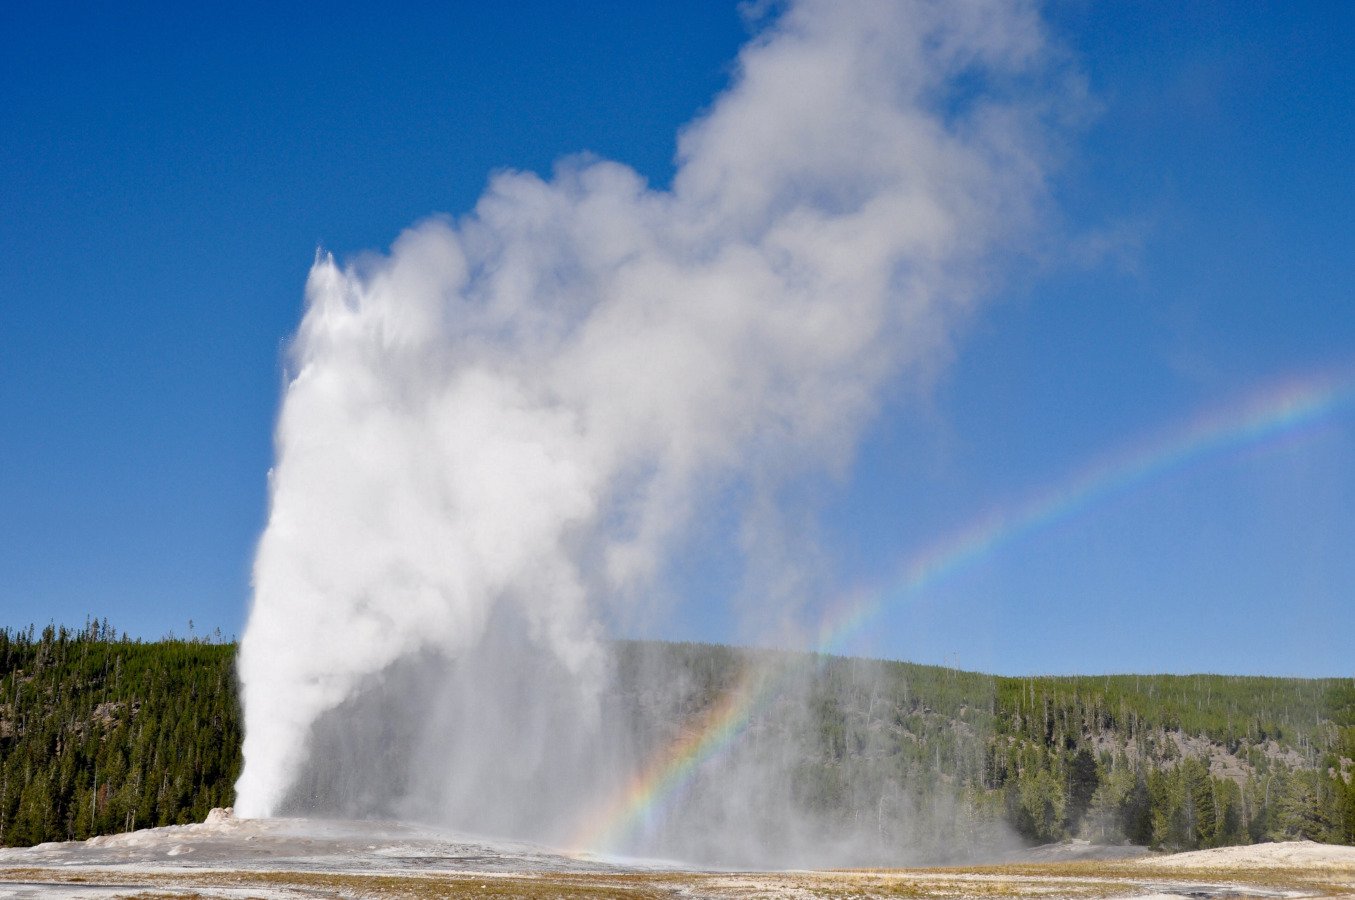 Top 23 Most Famous Attractions at Yellowstone (Detailed)